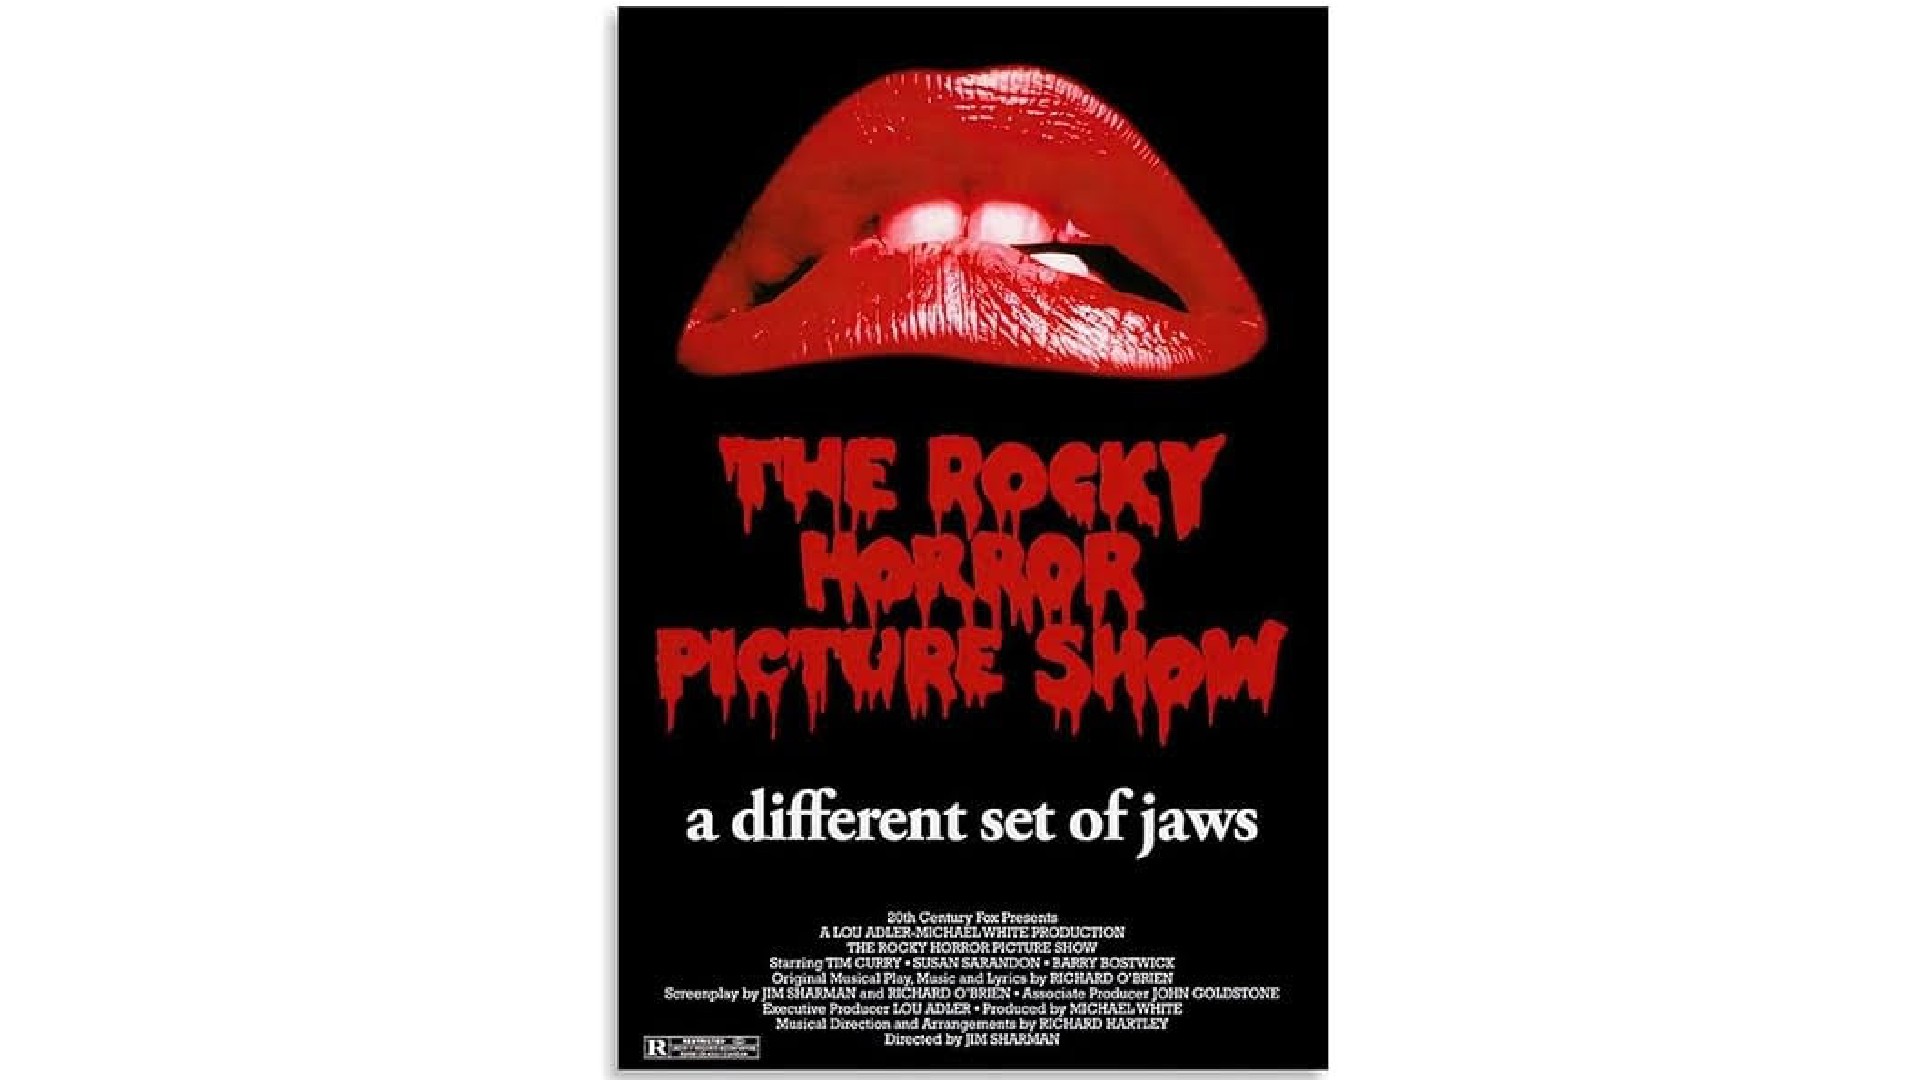 Horror film poster for Rocky Horror Picture Show